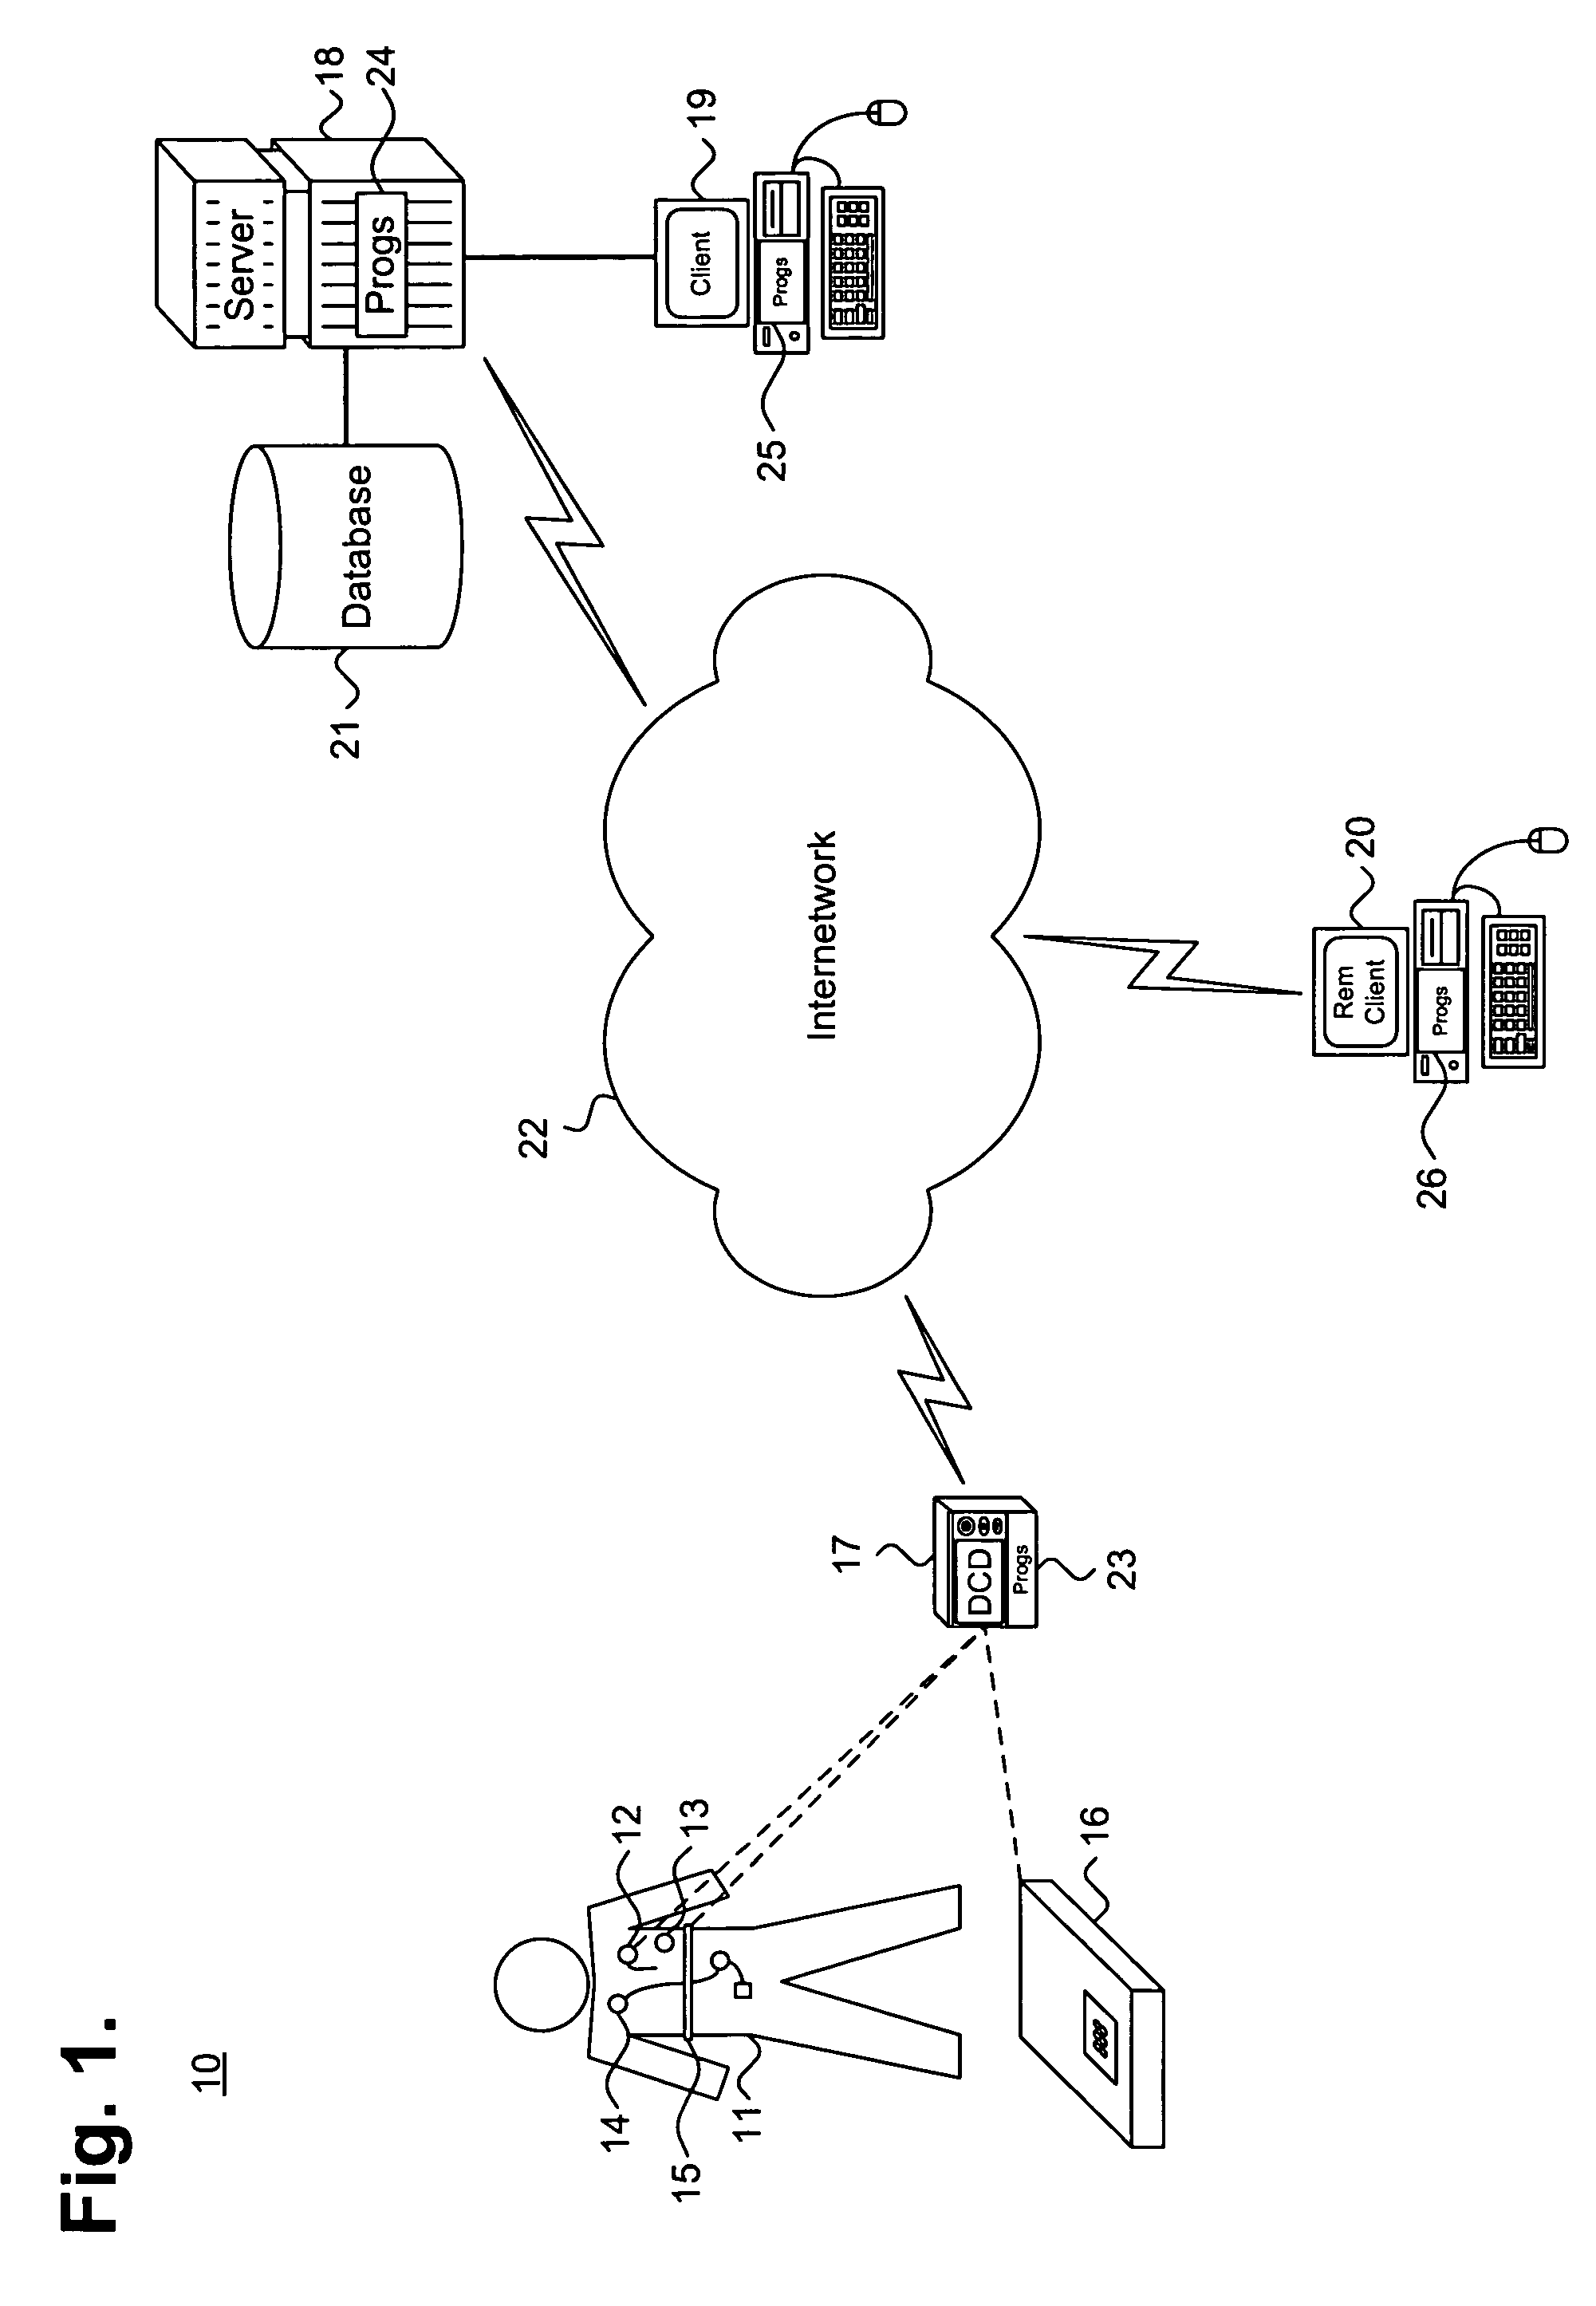 System and method for managing alert notifications in an automated patient management system